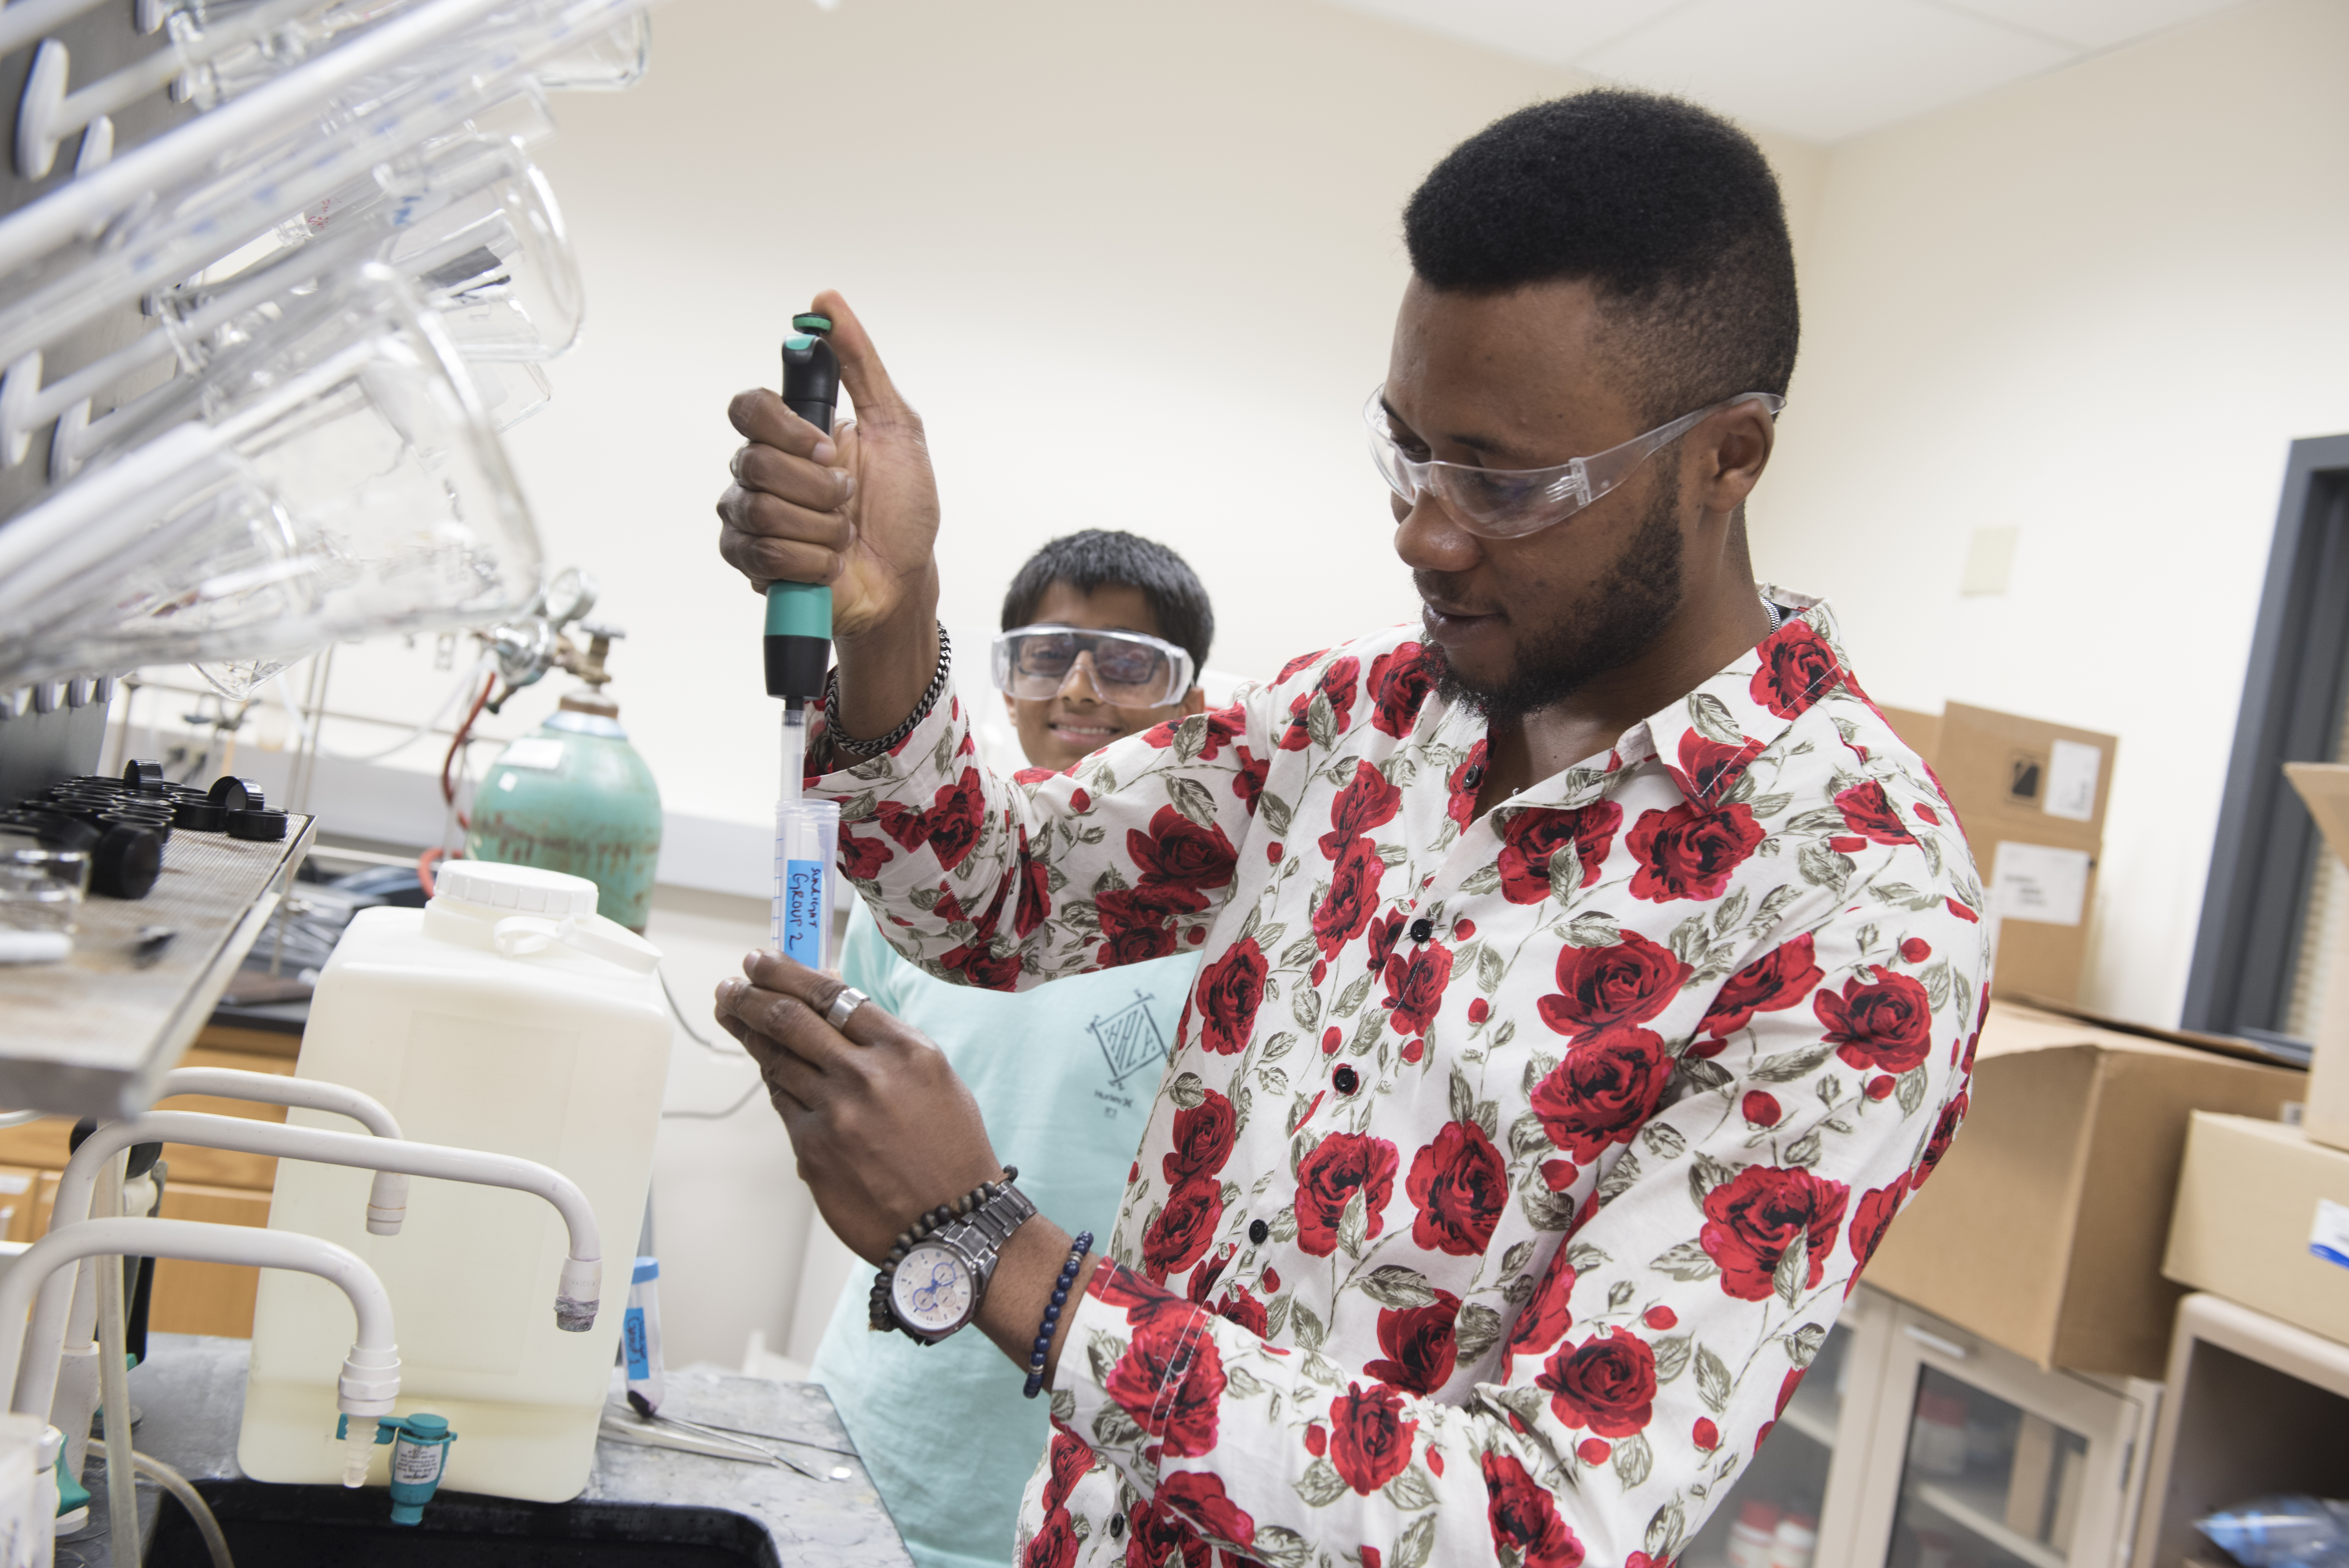 Illinois State graduate student Pascal Eyimegwu at work in the lab.